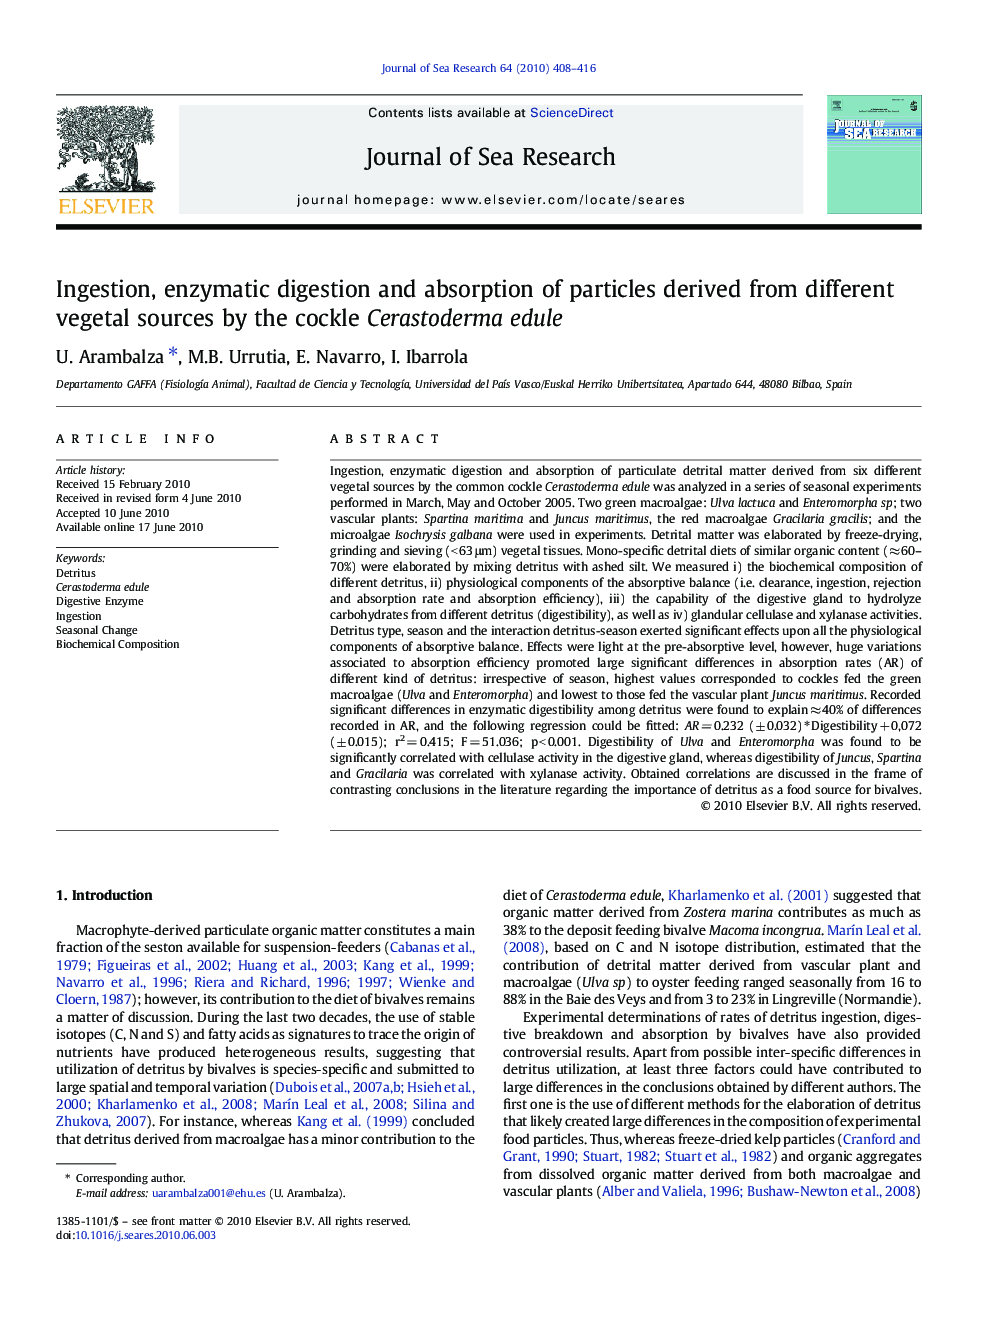 Ingestion, enzymatic digestion and absorption of particles derived from different vegetal sources by the cockle Cerastoderma edule